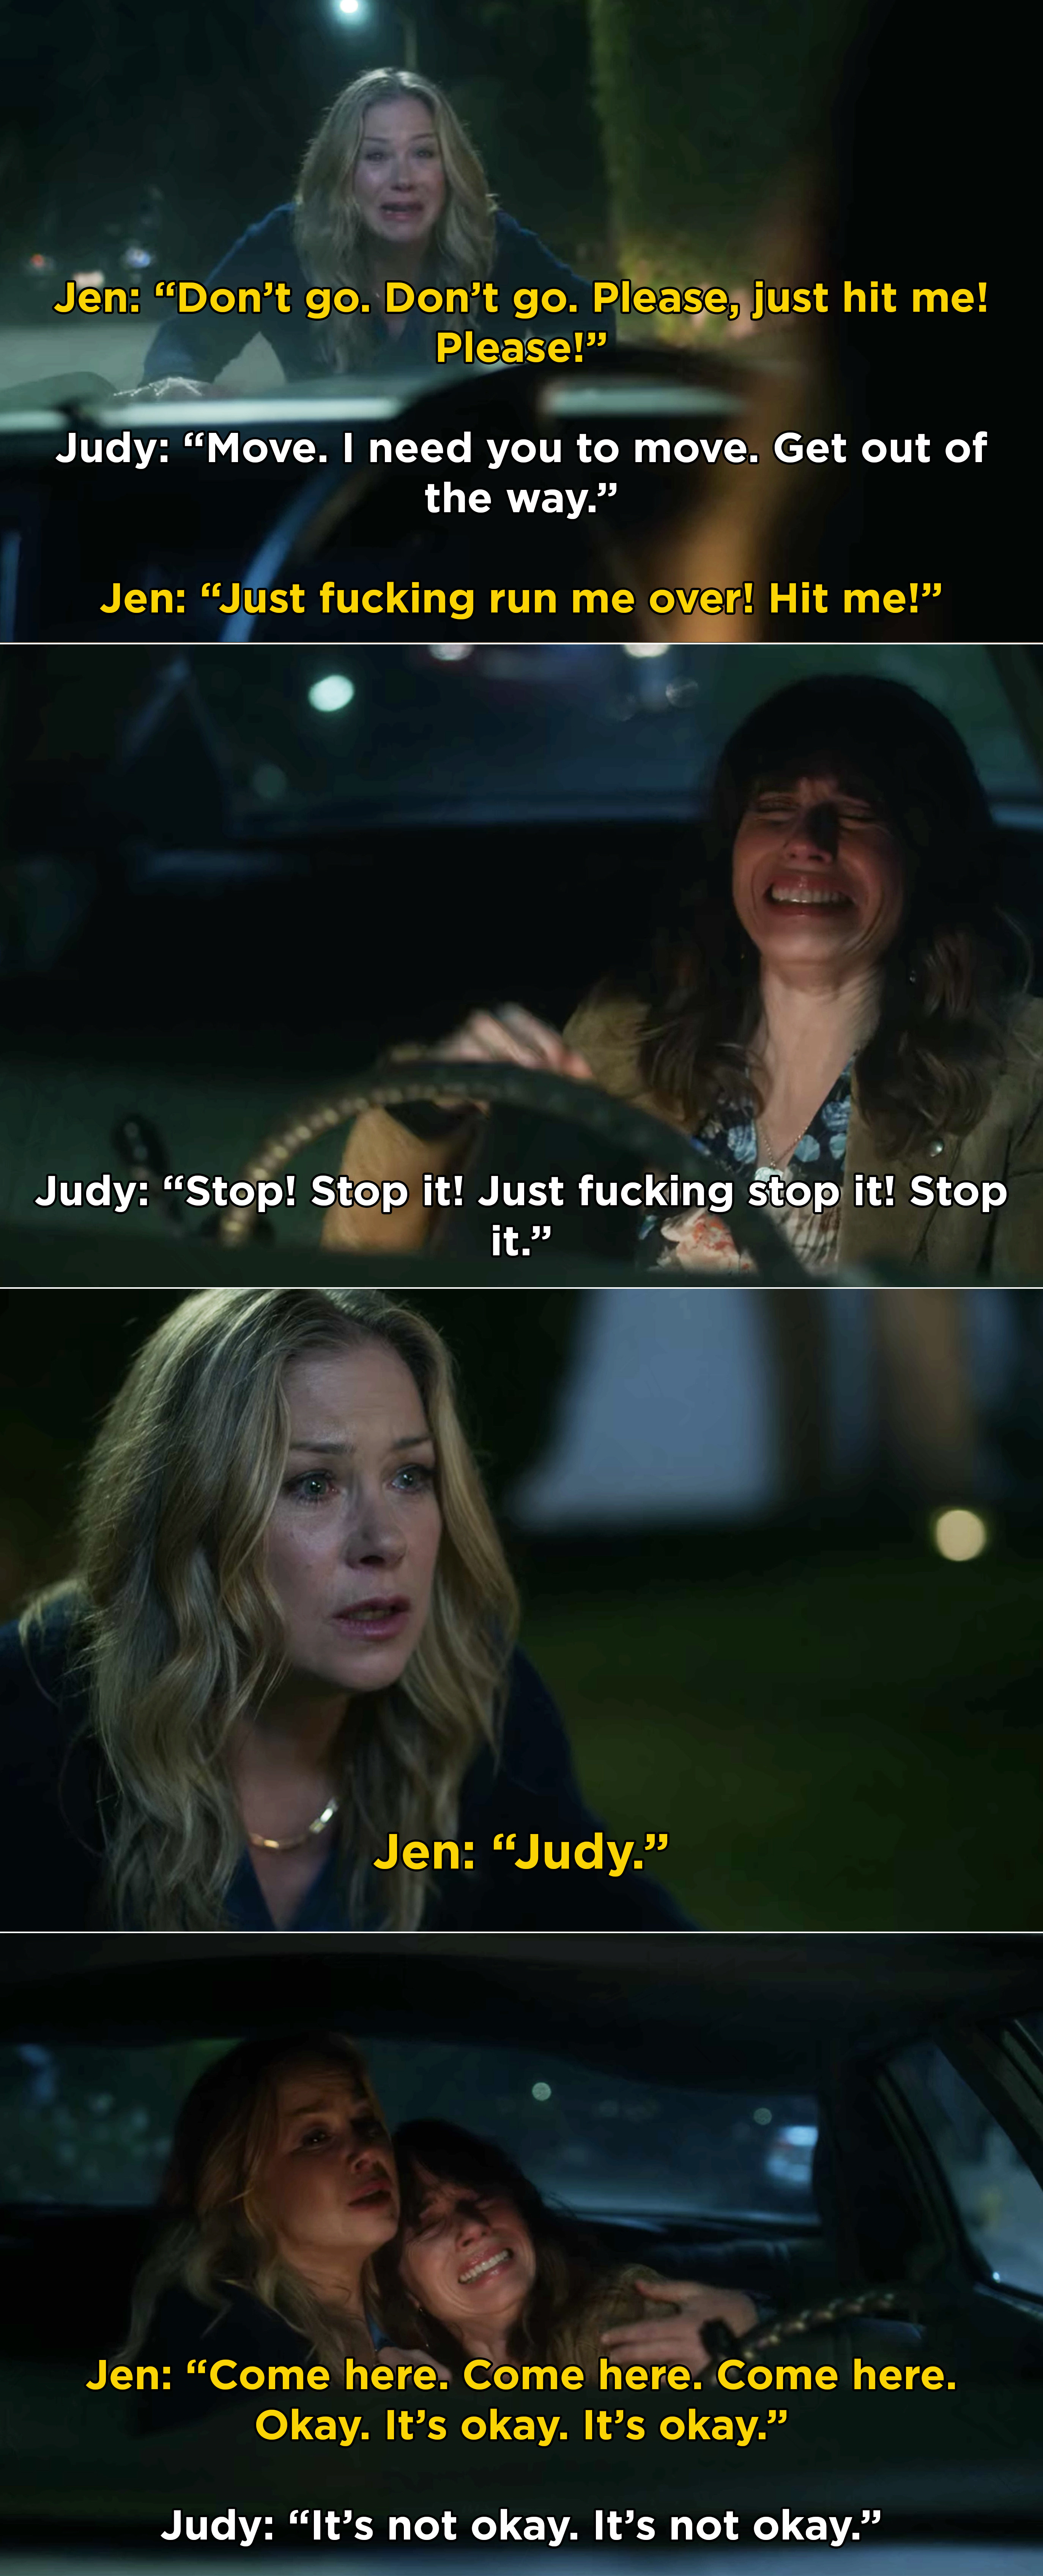 Judy screaming for Jen to stop it, then Jen getting in the car and hugging Judy